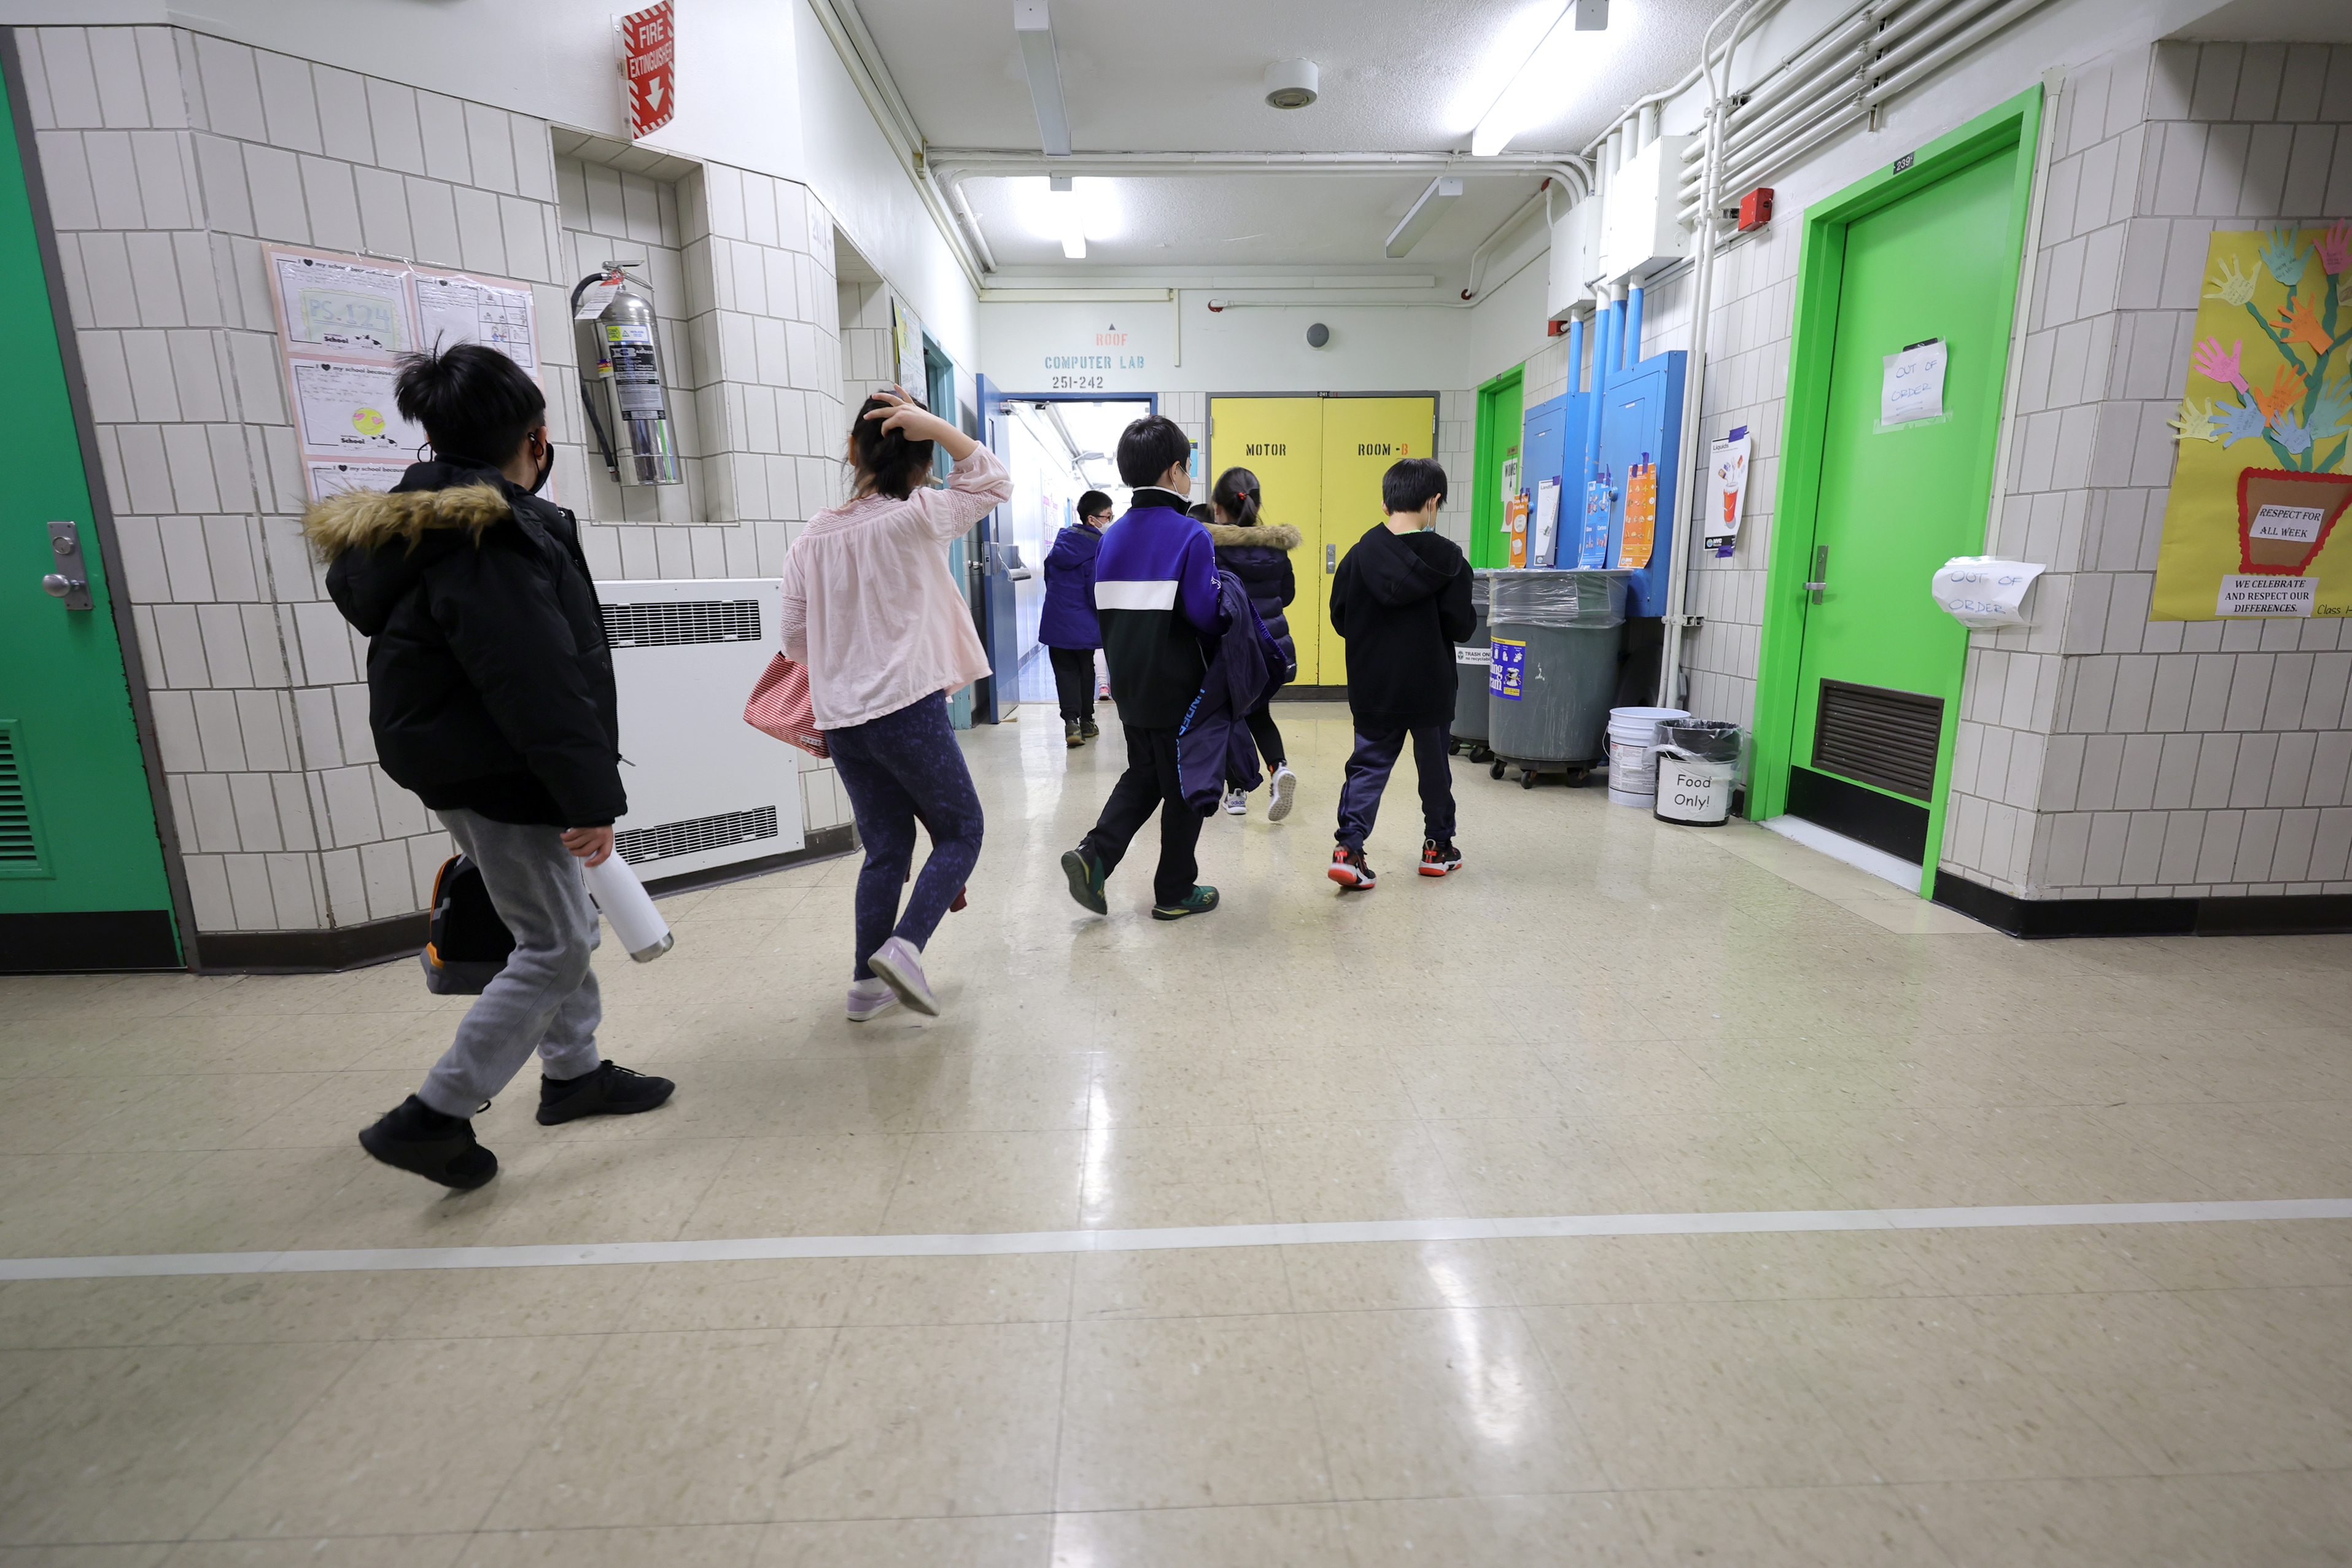 Students walking in a New York City classroom.